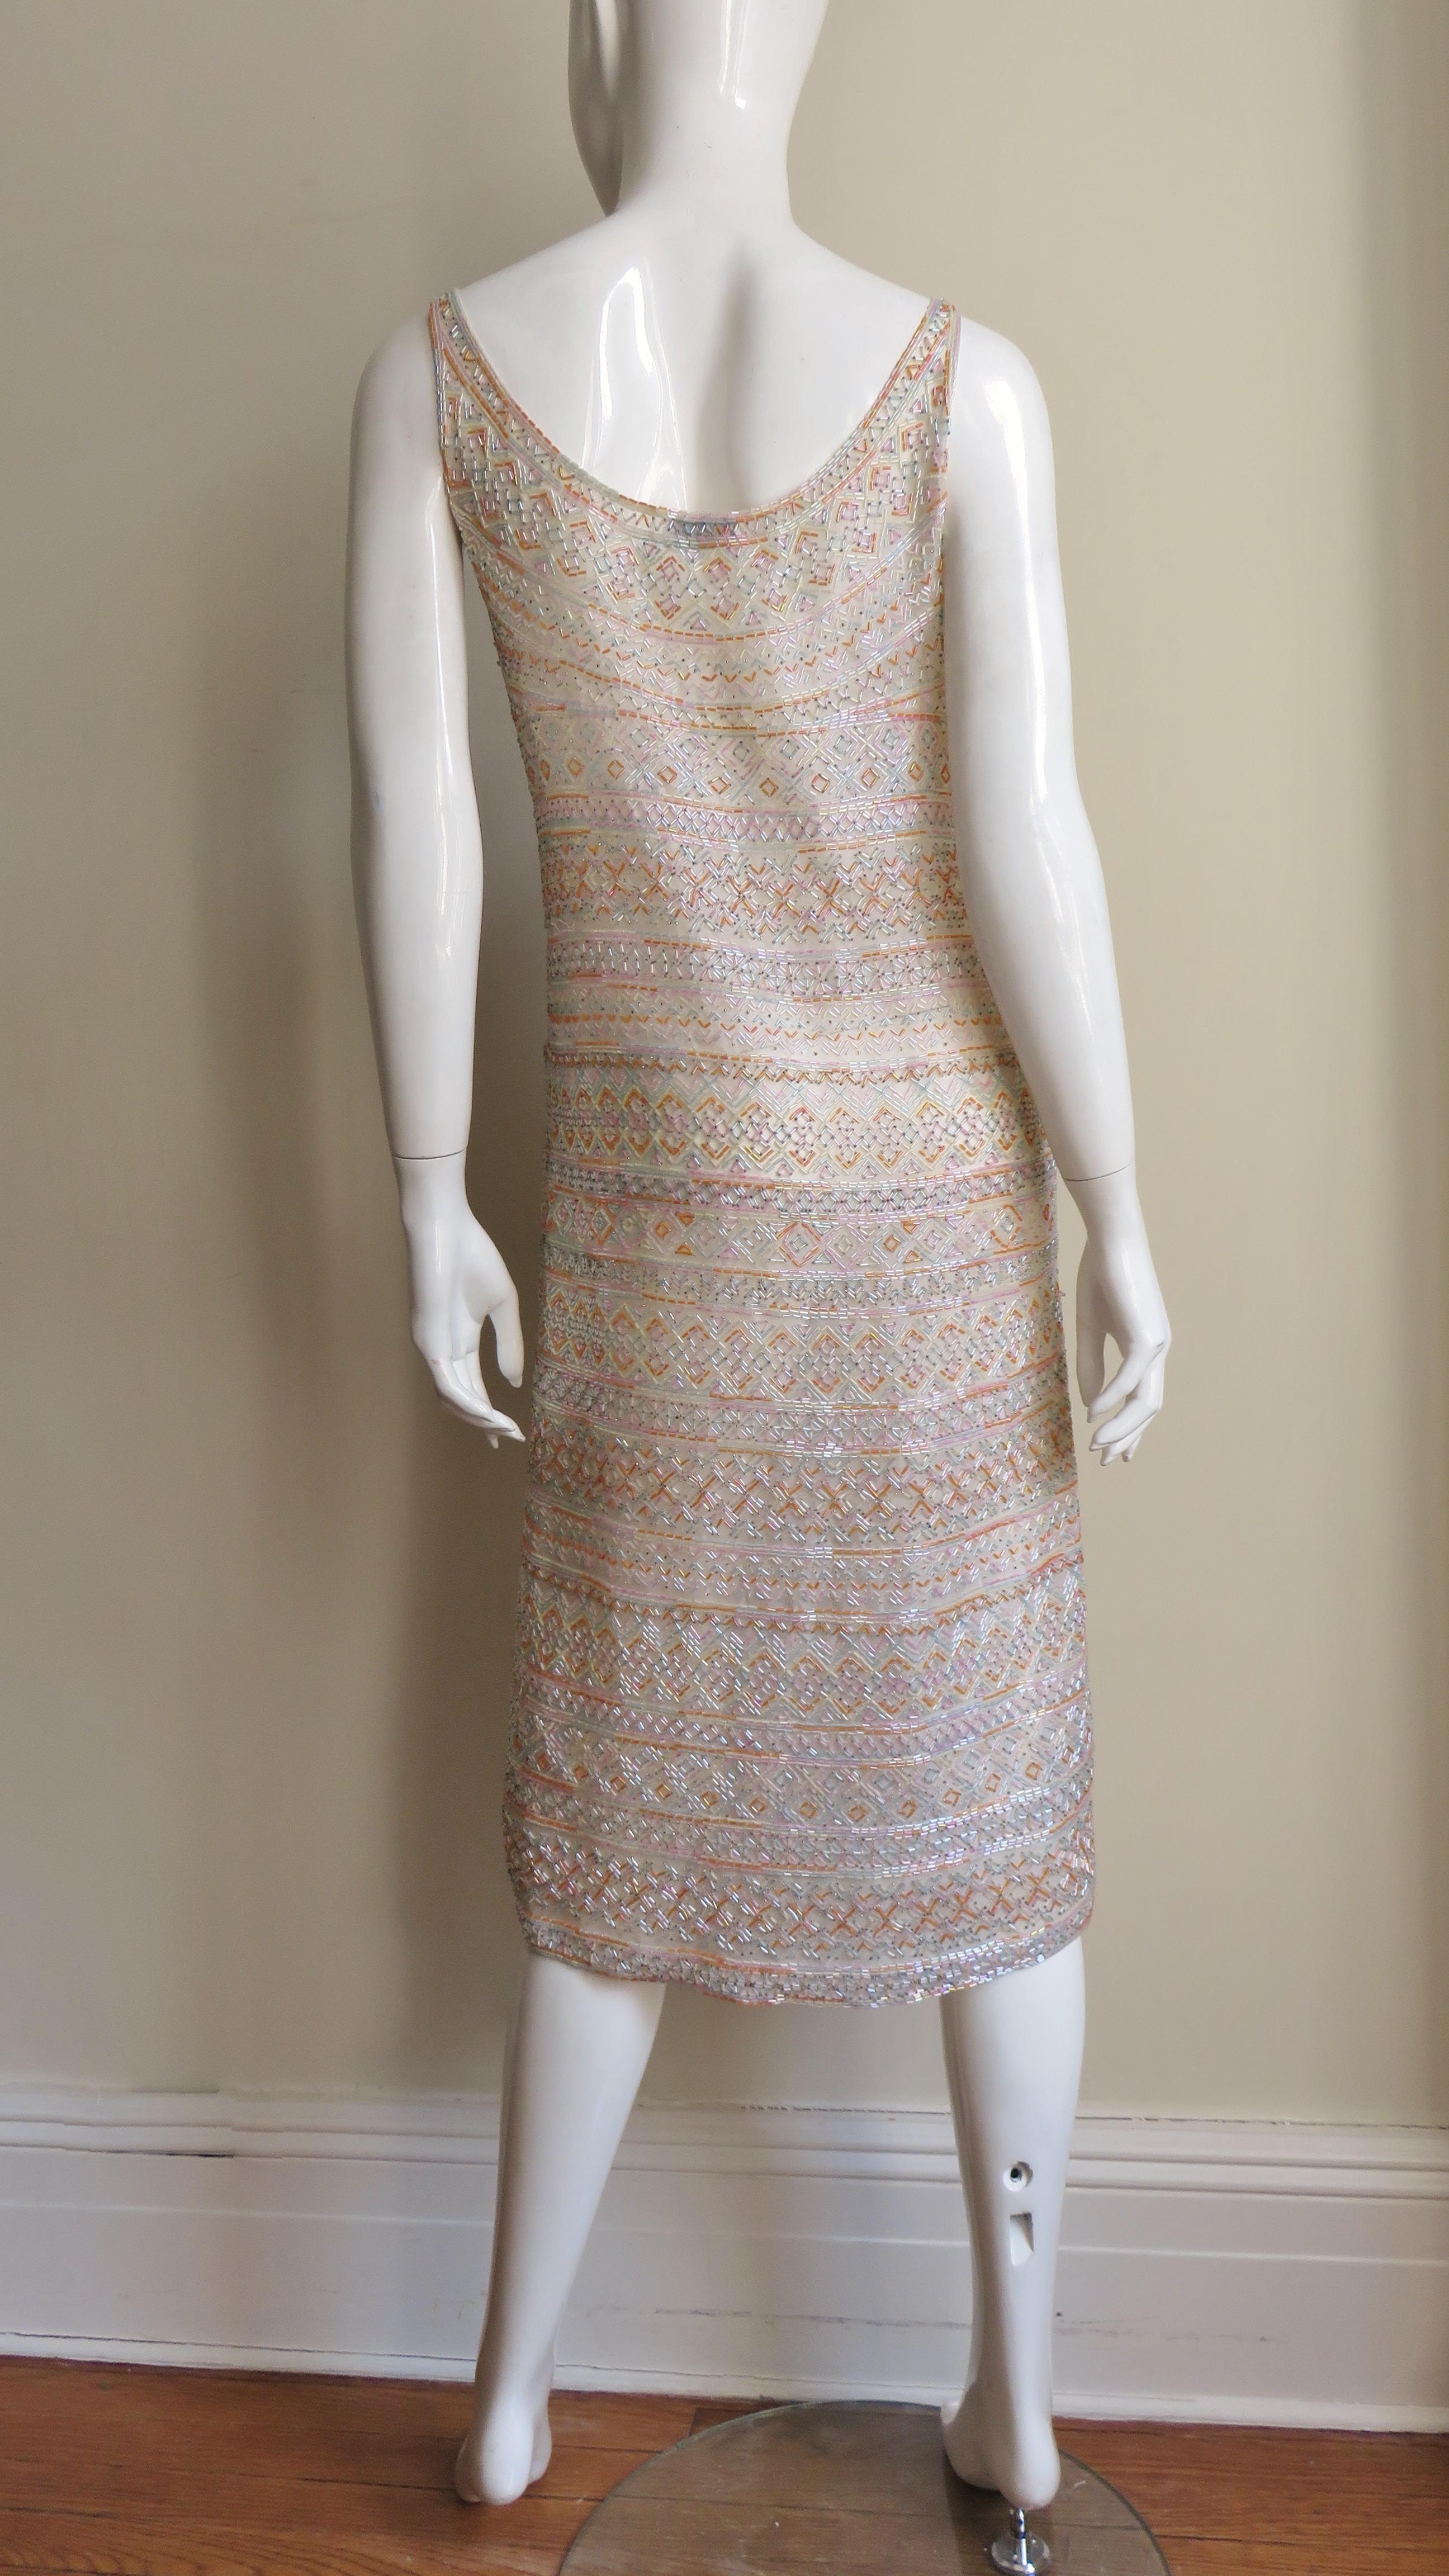  Halston 1970s Documented Beaded Dress  For Sale 8